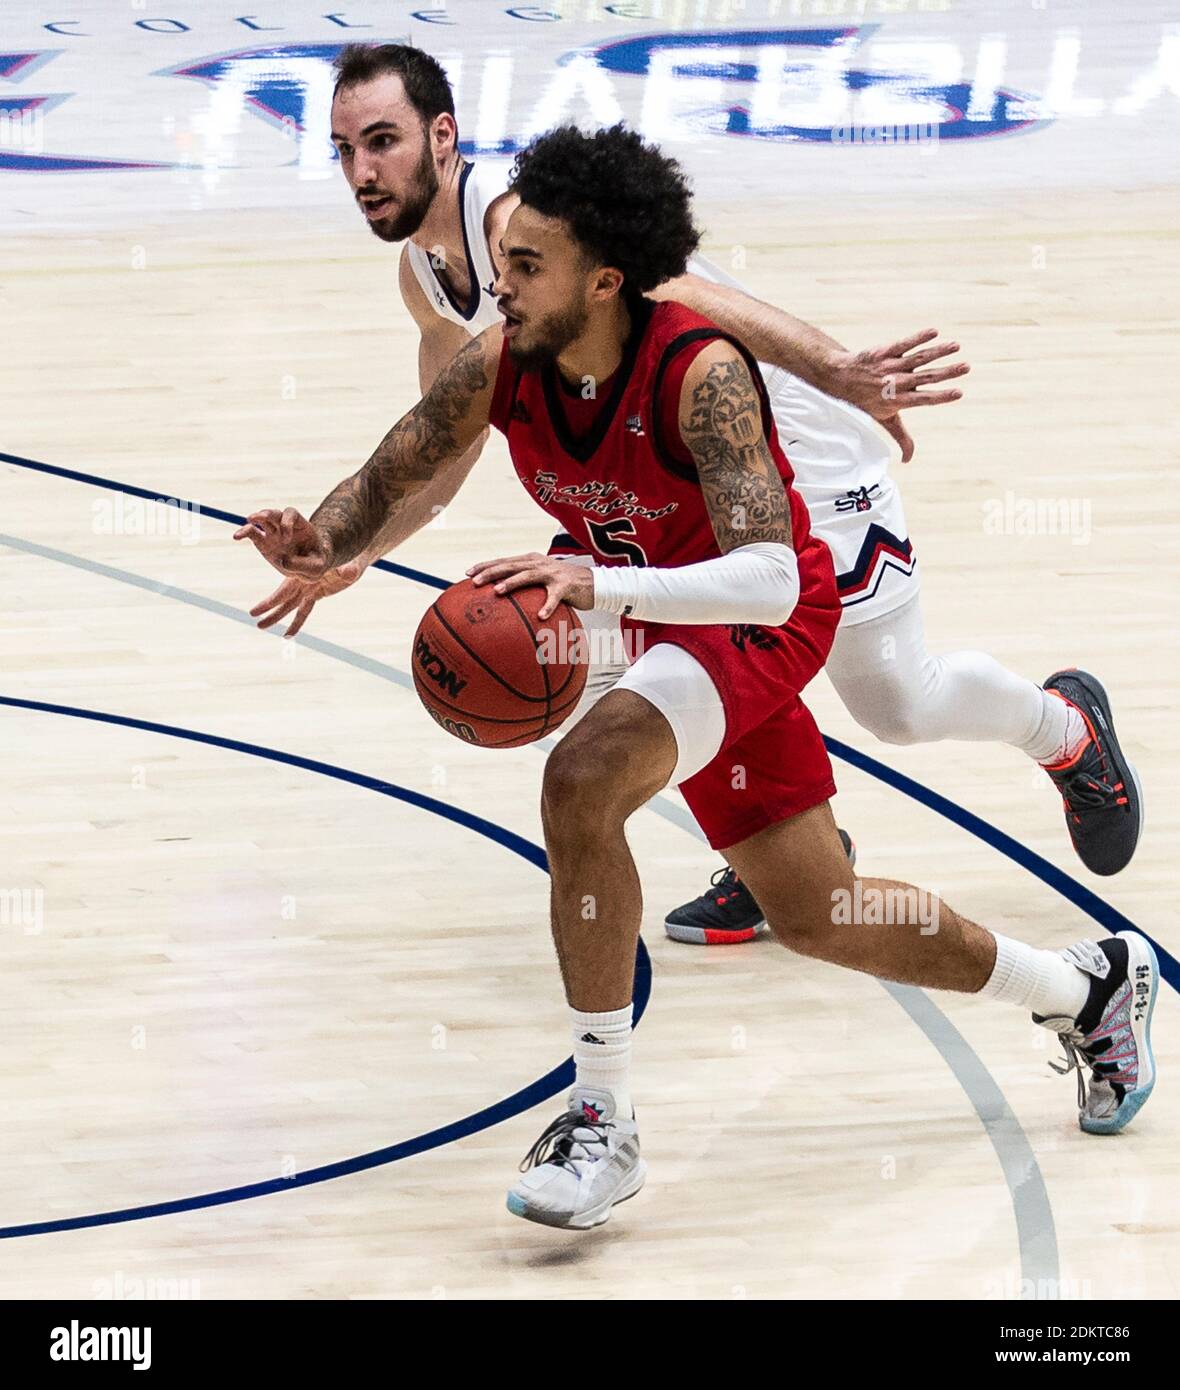 Moraga, CA U.S. 15th Dec, 2020. A. Eastern Washington Eagles guard Casson Rouse (5) brings the ball up court during the NCAA Men's Basketball game between Eastern Washington Eagles and the Saint Mary's Gaels 75-80 lost at McKeon Pavilion Moraga Calif. Thurman James/CSM/Alamy Live News Stock Photo